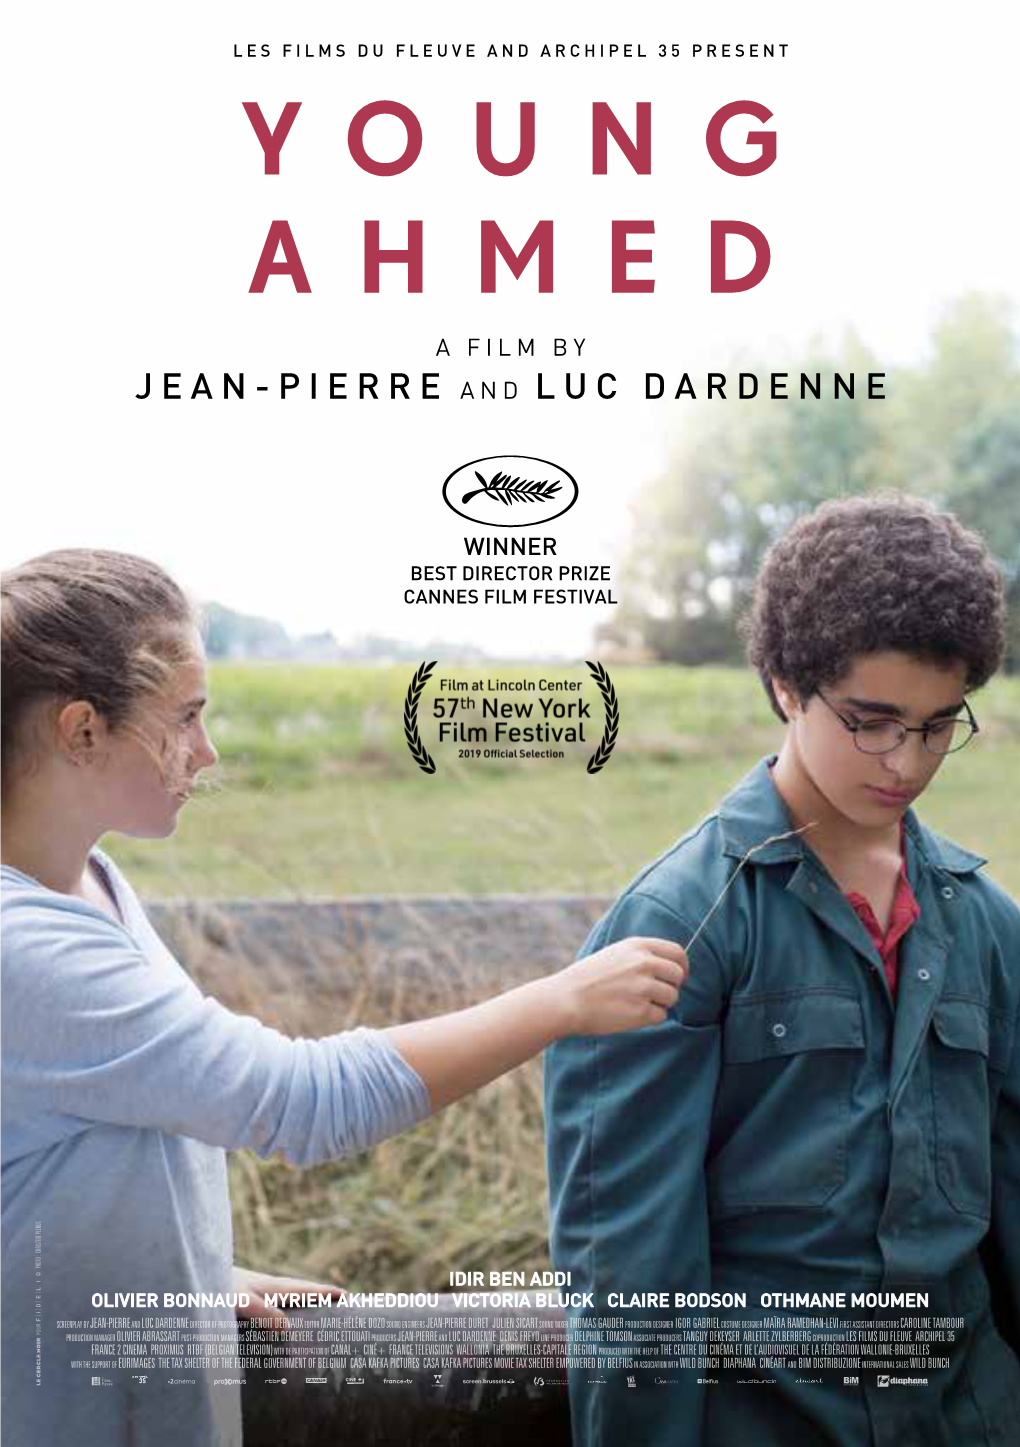 Young Ahmed a Film by Jean-Pierre and Luc Dardenne